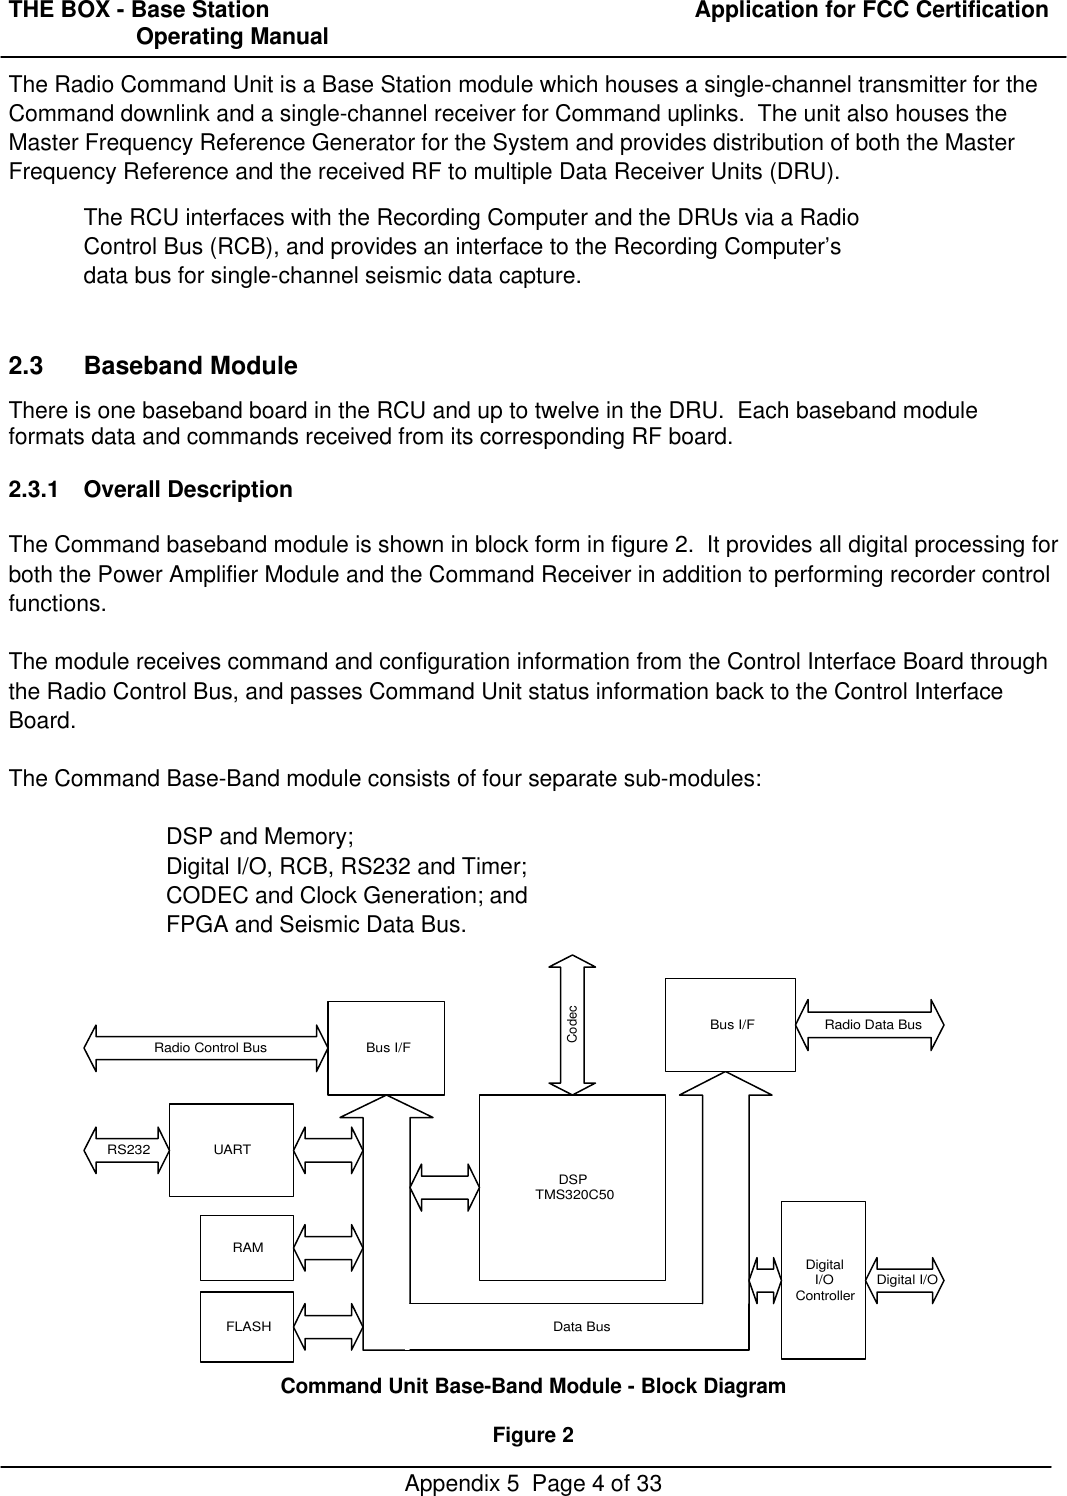 THE BOX - Base Station  Application for FCC Certification                    Operating ManualAppendix 5  Page 4 of 33The Radio Command Unit is a Base Station module which houses a single-channel transmitter for theCommand downlink and a single-channel receiver for Command uplinks.  The unit also houses theMaster Frequency Reference Generator for the System and provides distribution of both the MasterFrequency Reference and the received RF to multiple Data Receiver Units (DRU).The RCU interfaces with the Recording Computer and the DRUs via a RadioControl Bus (RCB), and provides an interface to the Recording Computer’sdata bus for single-channel seismic data capture.2.3 Baseband ModuleThere is one baseband board in the RCU and up to twelve in the DRU.  Each baseband moduleformats data and commands received from its corresponding RF board.2.3.1 Overall DescriptionThe Command baseband module is shown in block form in figure 2.  It provides all digital processing forboth the Power Amplifier Module and the Command Receiver in addition to performing recorder controlfunctions.The module receives command and configuration information from the Control Interface Board throughthe Radio Control Bus, and passes Command Unit status information back to the Control InterfaceBoard.The Command Base-Band module consists of four separate sub-modules:DSP and Memory;Digital I/O, RCB, RS232 and Timer;CODEC and Clock Generation; andFPGA and Seismic Data Bus.DSPTMS320C50UARTRS232Bus I/FRadio Control BusCodecDigitalI/OController Digital I/ORAMFLASH Data BusBus I/F Radio Data BusCommand Unit Base-Band Module - Block DiagramFigure 2